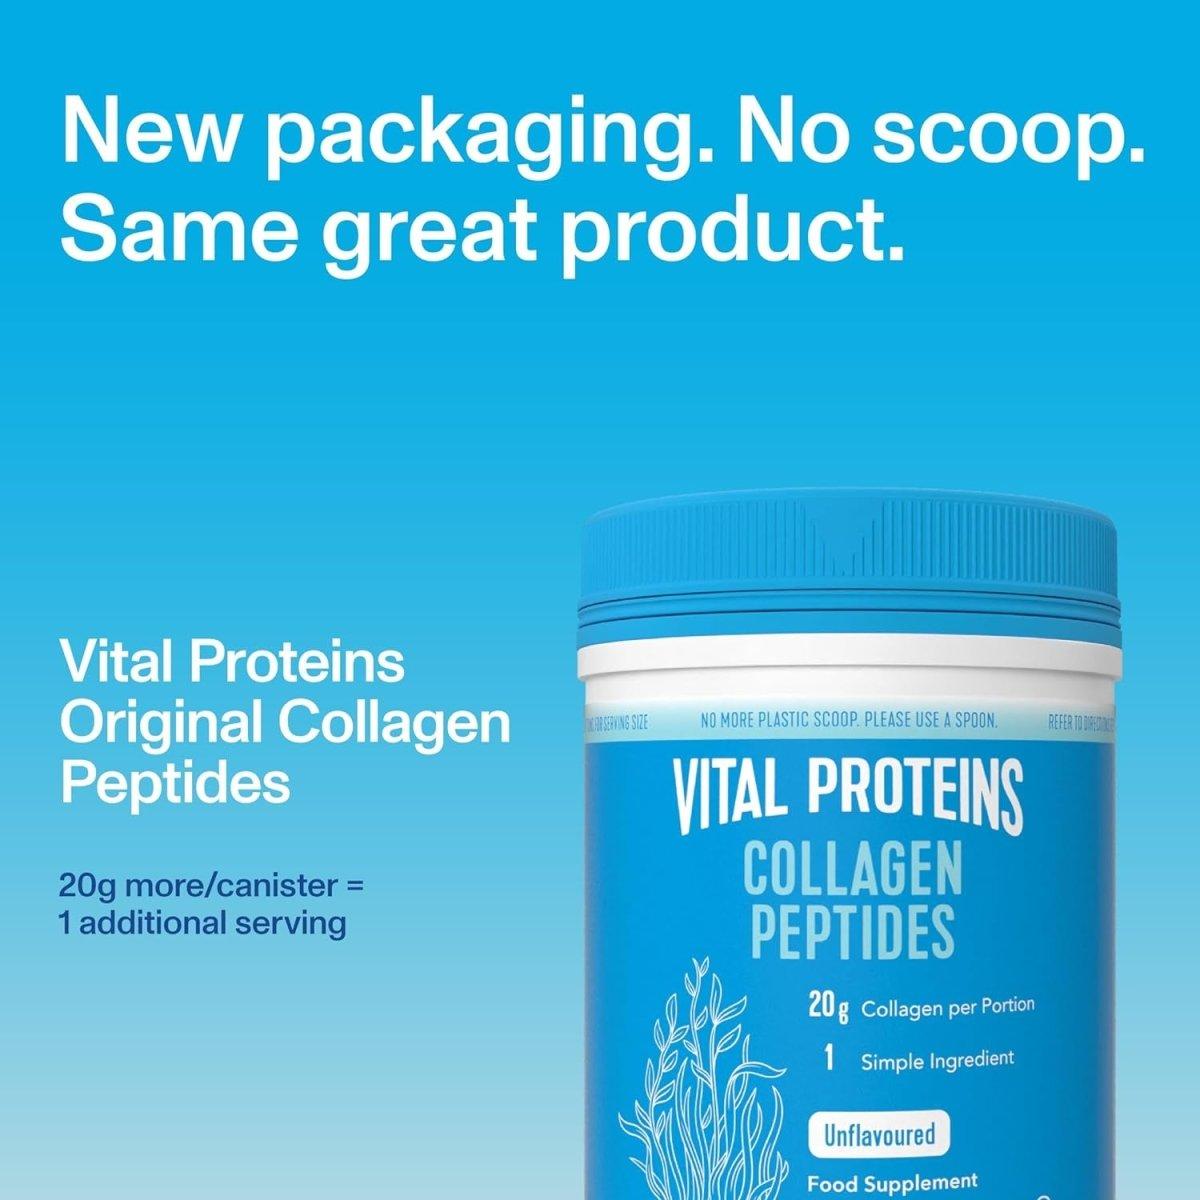 Vital Proteins Collagen Peptides Powder Supplement (Type I, III), Unflavored Hydrolyzed Collagen - 284g - Glam Global UK